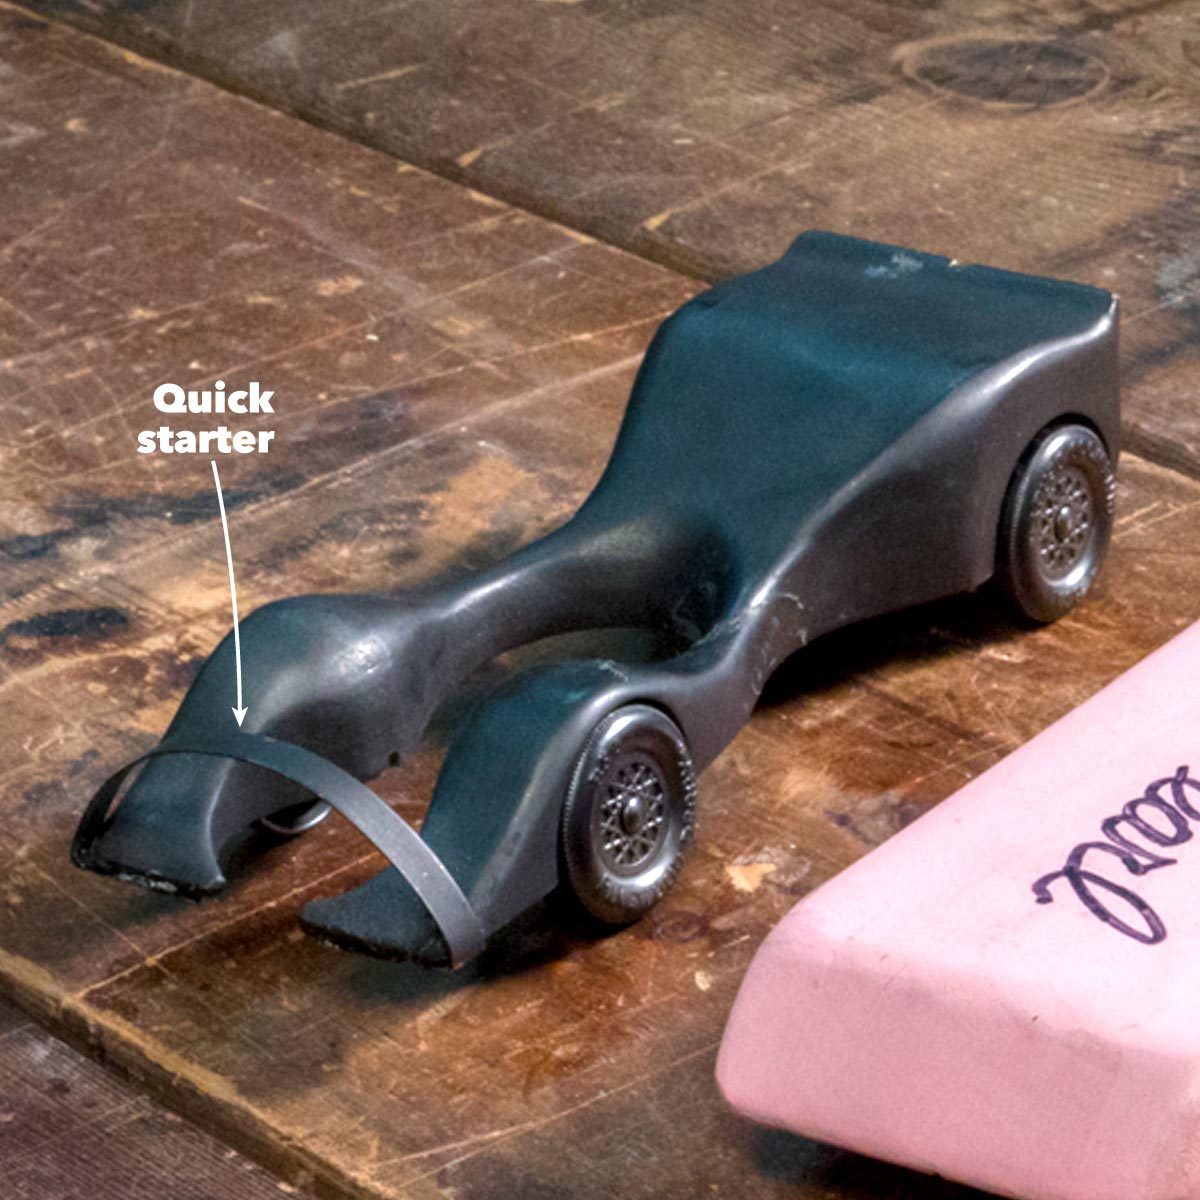 9 Awesome Pinewood Derby Race Car Designs